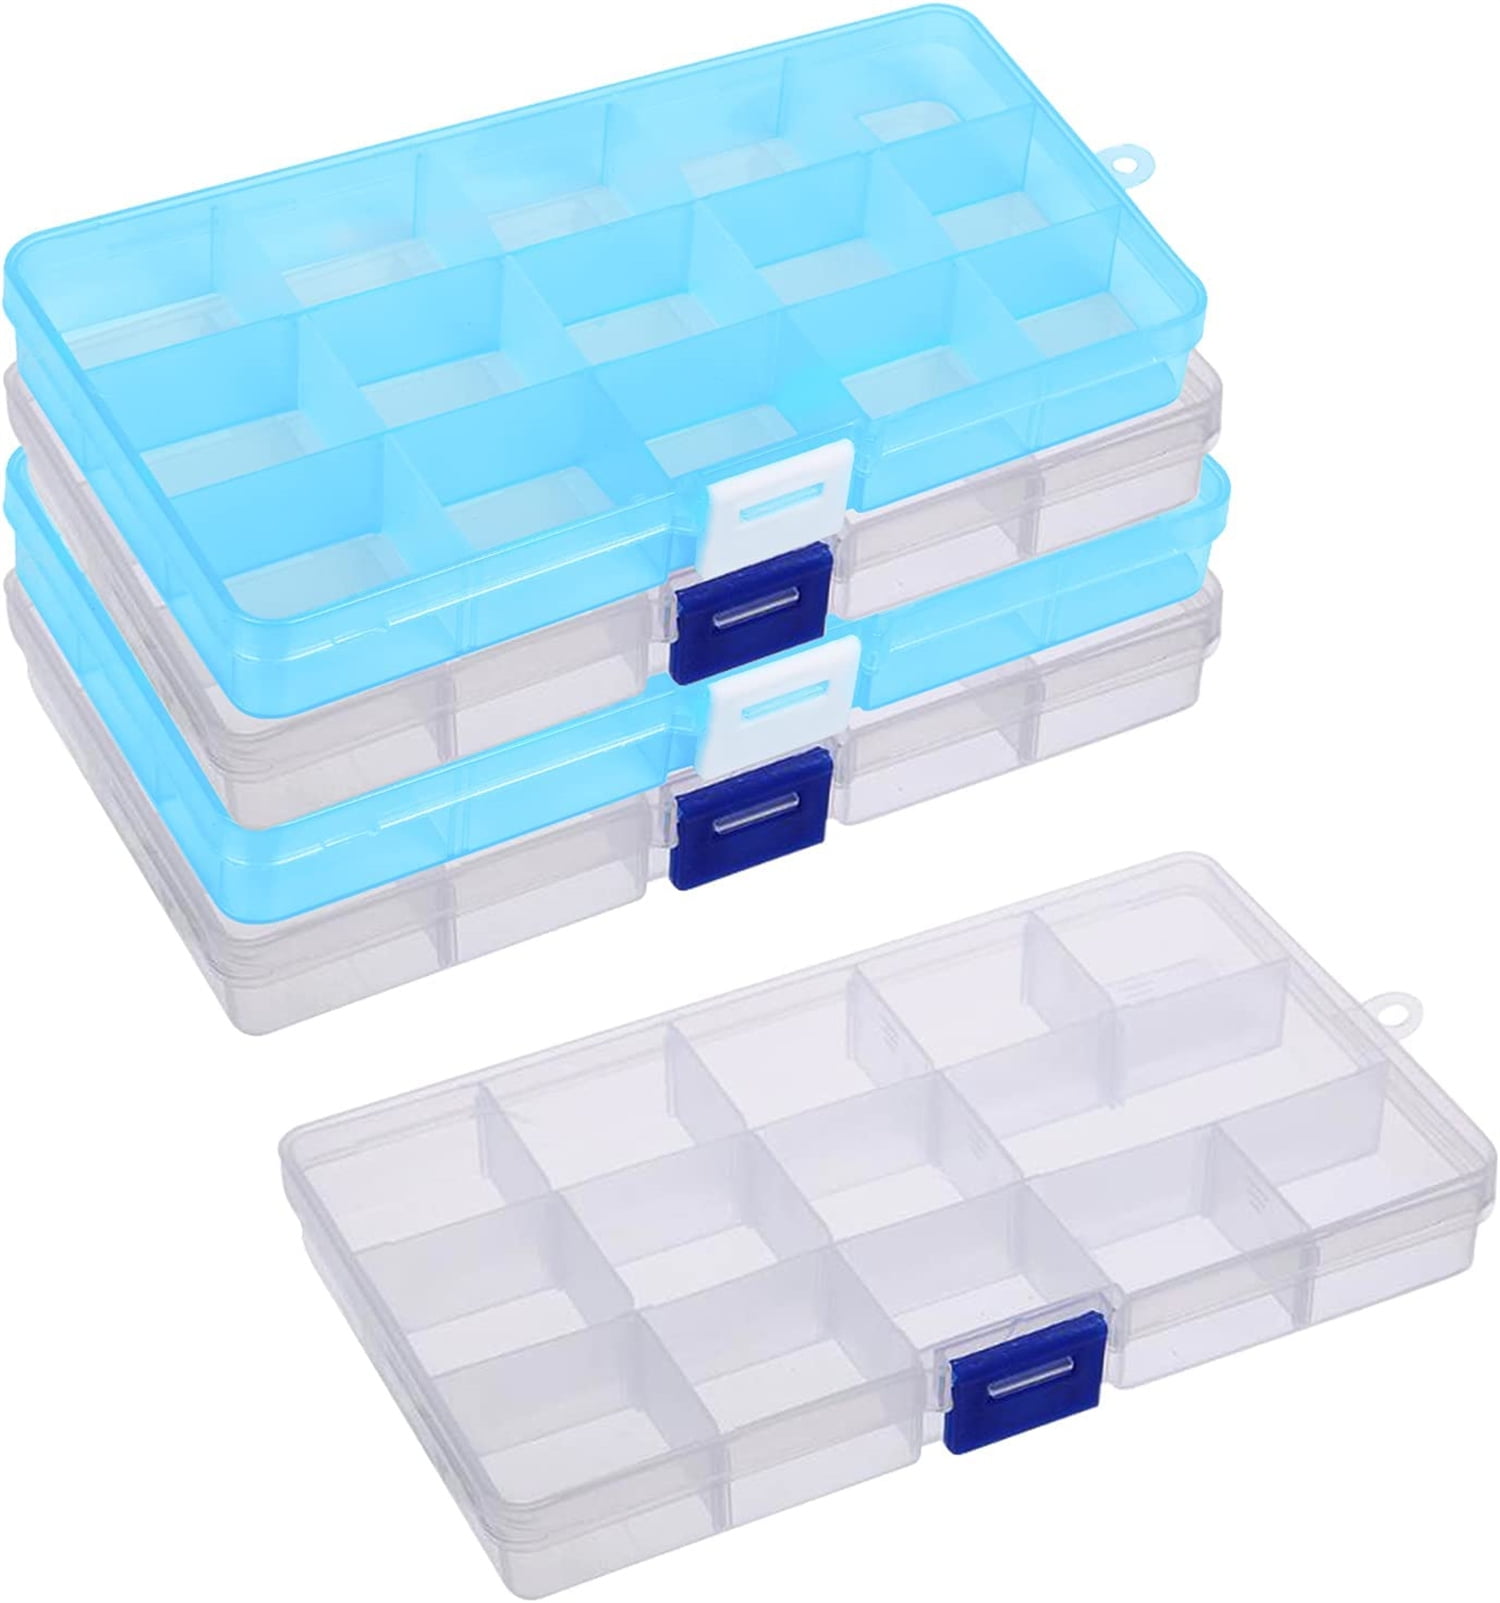  UTENEW 2 Pack Plastic Clear Jewelry Boxes Organizers